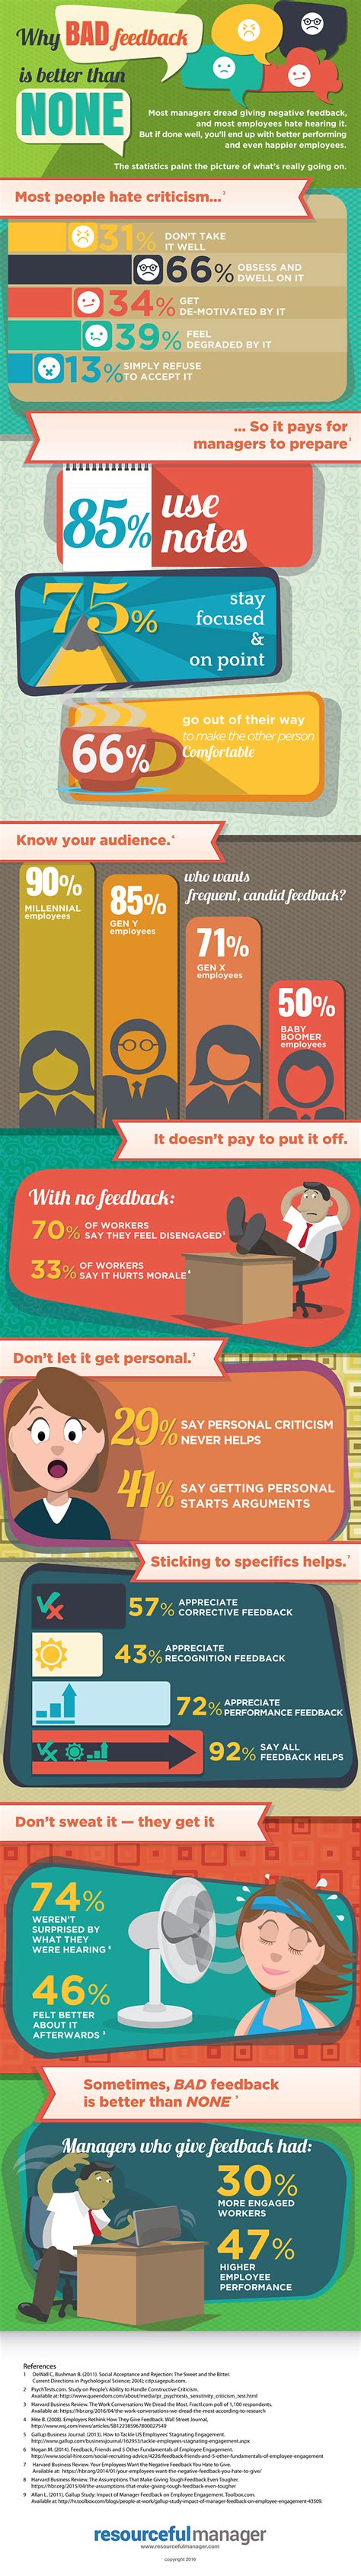 How To Deliver Negative Feedback And Why It Matters Infographic